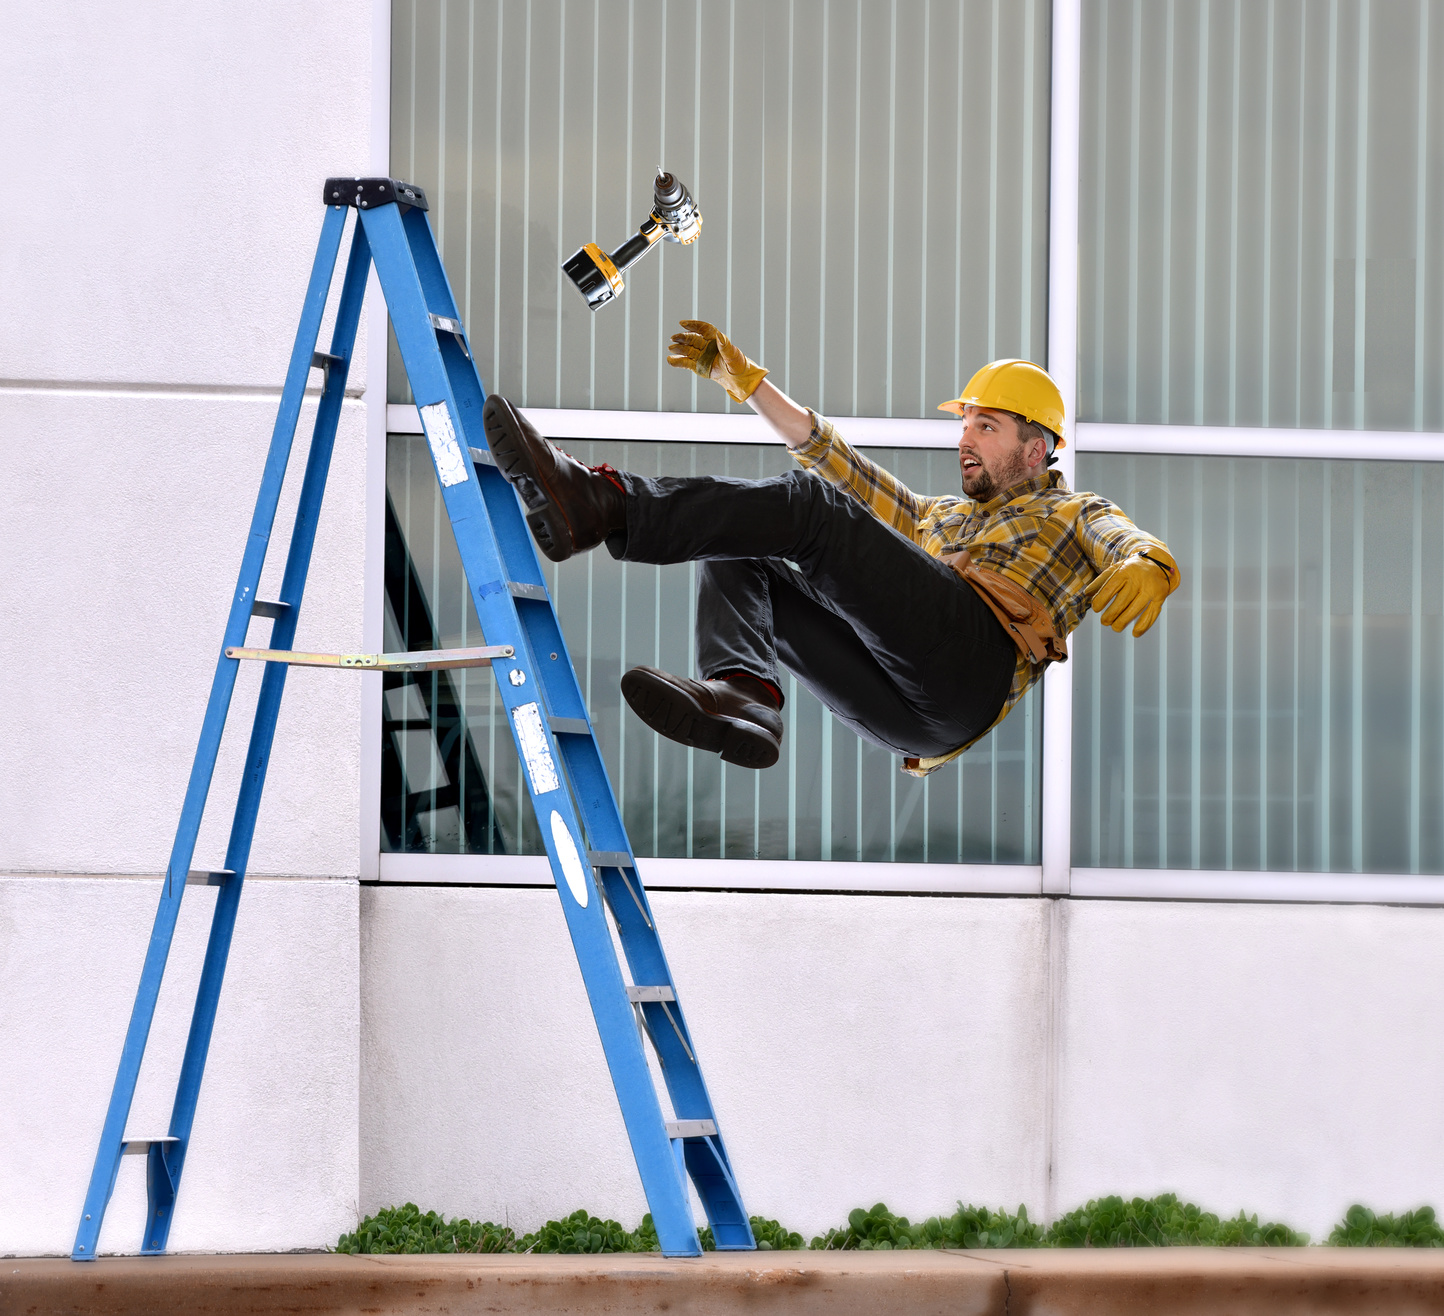 A worker falls from ladder while making repairs to building